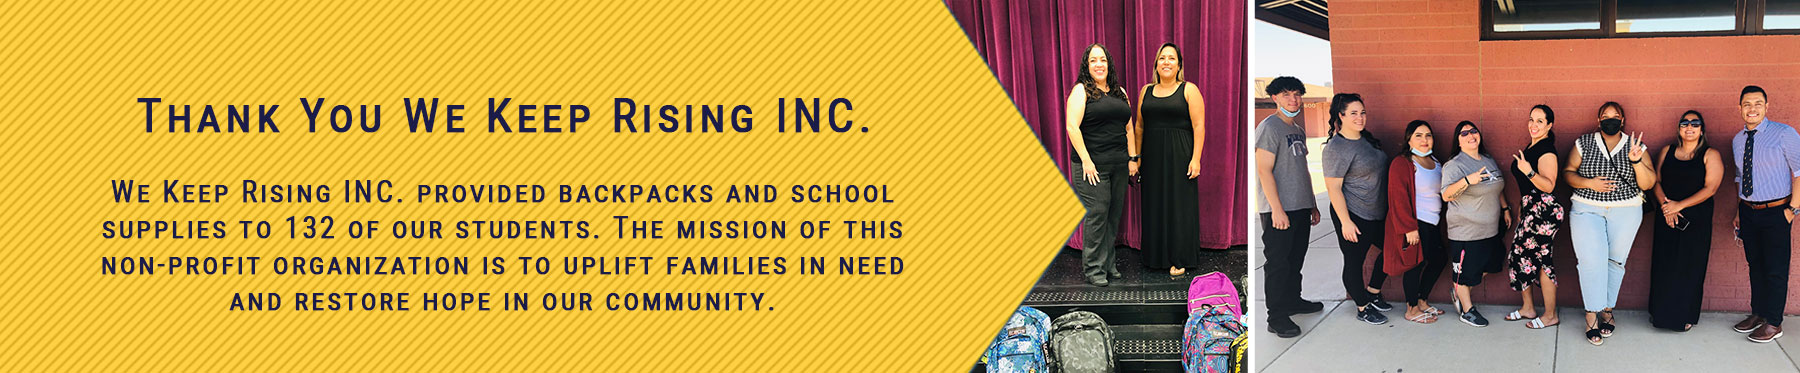 Thank You We Keep Rising INC. We Keep Rising INC. provided backpacks and school supplies to 132 of our students. The mission of this non-profit organization is to uplift families in need and restore hope in our community.